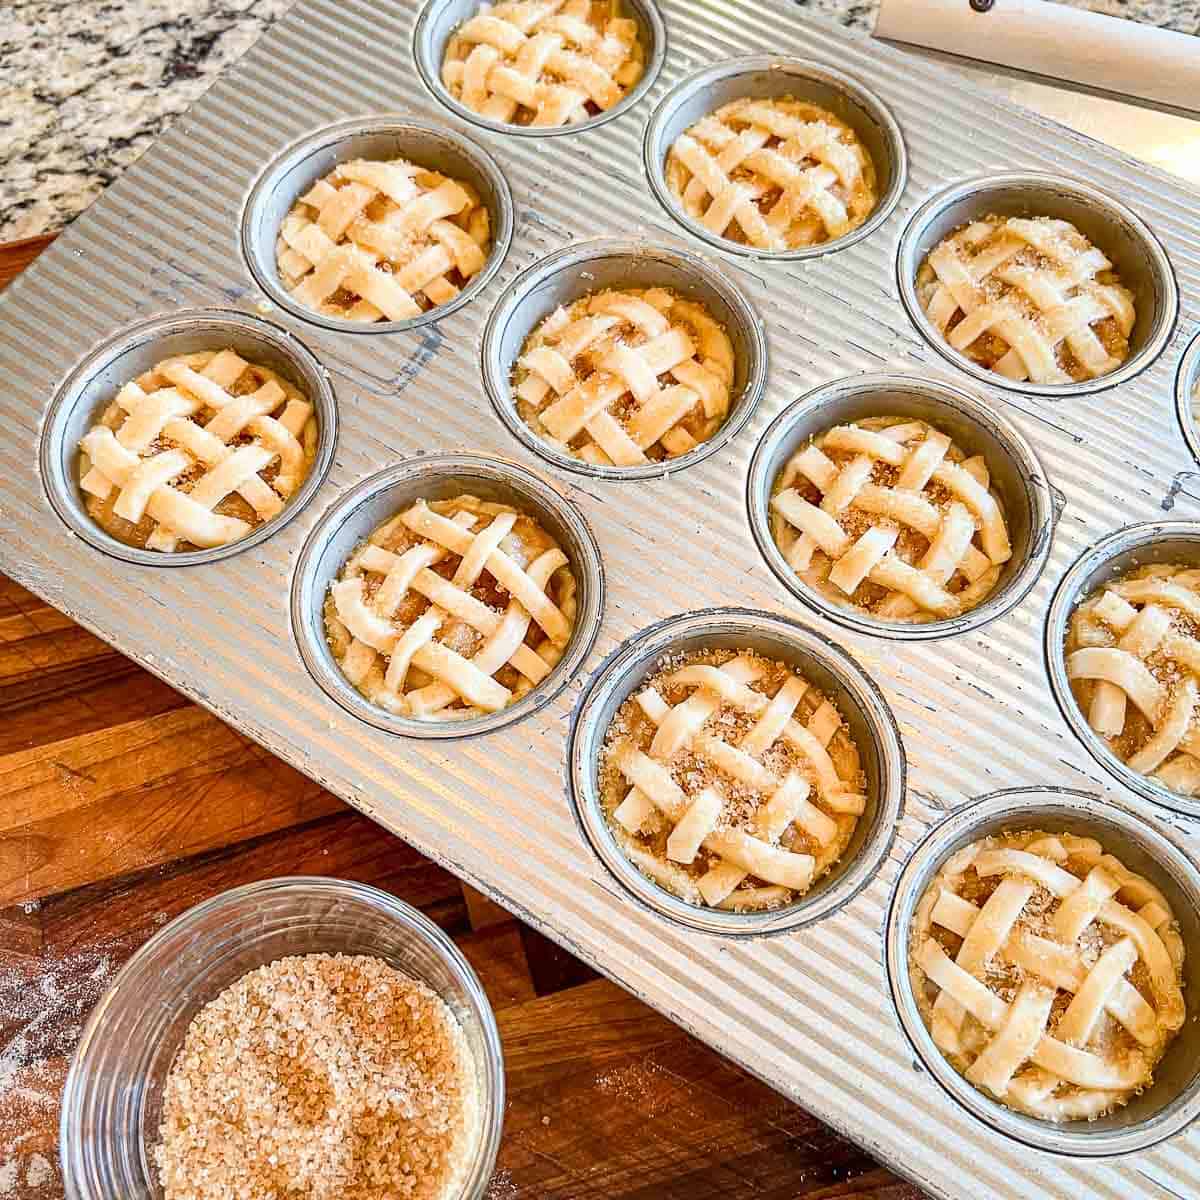 A muffin tin full of unbaked mini apple pies with lattice top ready for the oven.